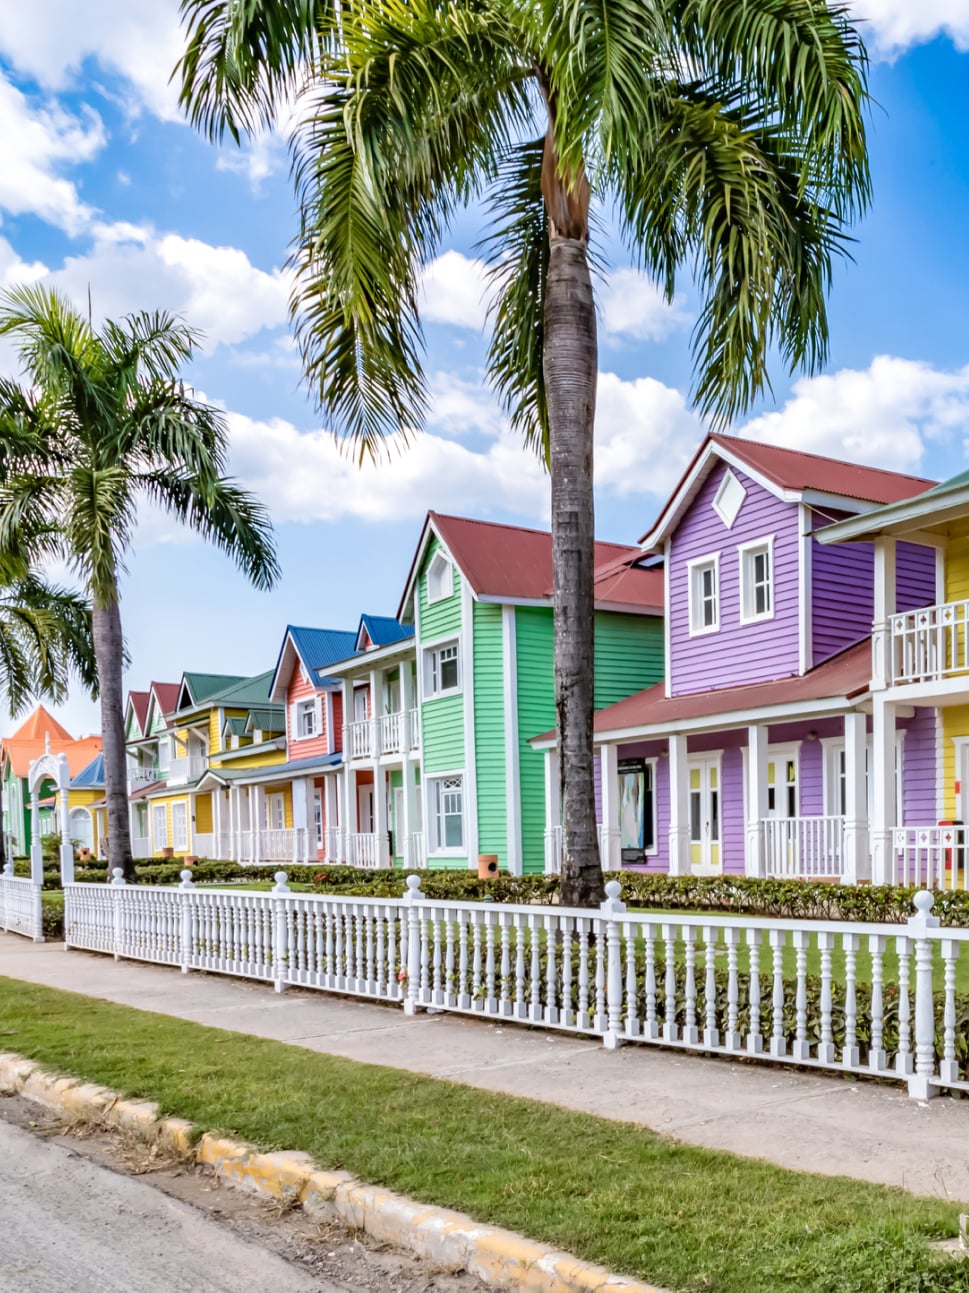 The colourful houses of the Dominican Republic